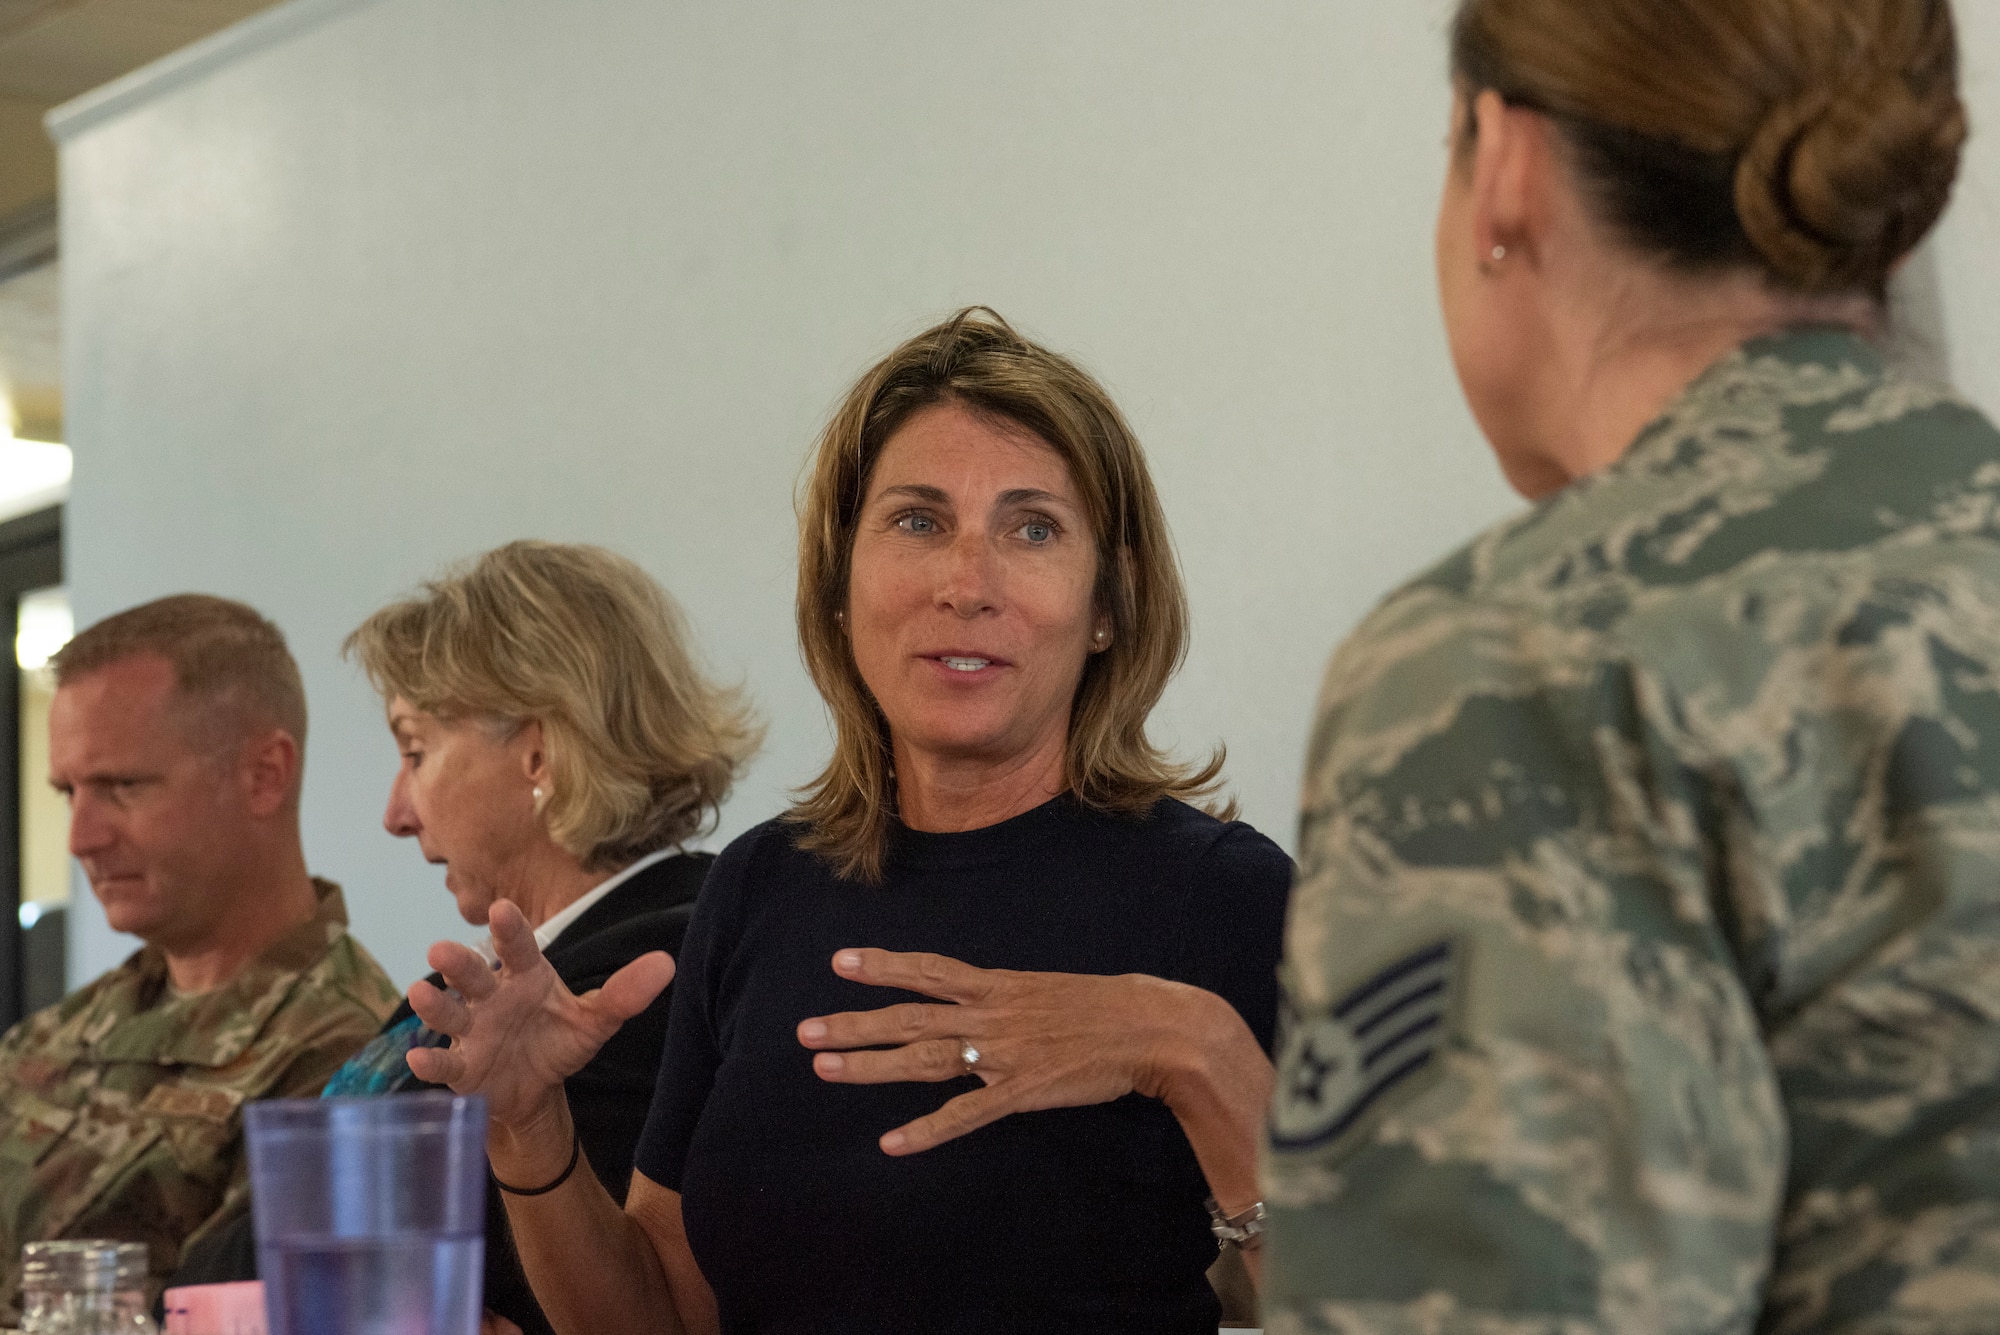 Sarah Troff, converses with Airmen about their experience during and after Hurricane Michael at Tyndall Air Force Base, Fla., Feb. 25, 2019. Sarah, her mother Mary Tyndall Troff and sisters were invited to visit TAFB after Mary sent a letter about her concerns for the base and the well-being of Airmen after Hurricane Michael. (U.S. Air Force photo by Staff Sgt. Alexandre Montes)